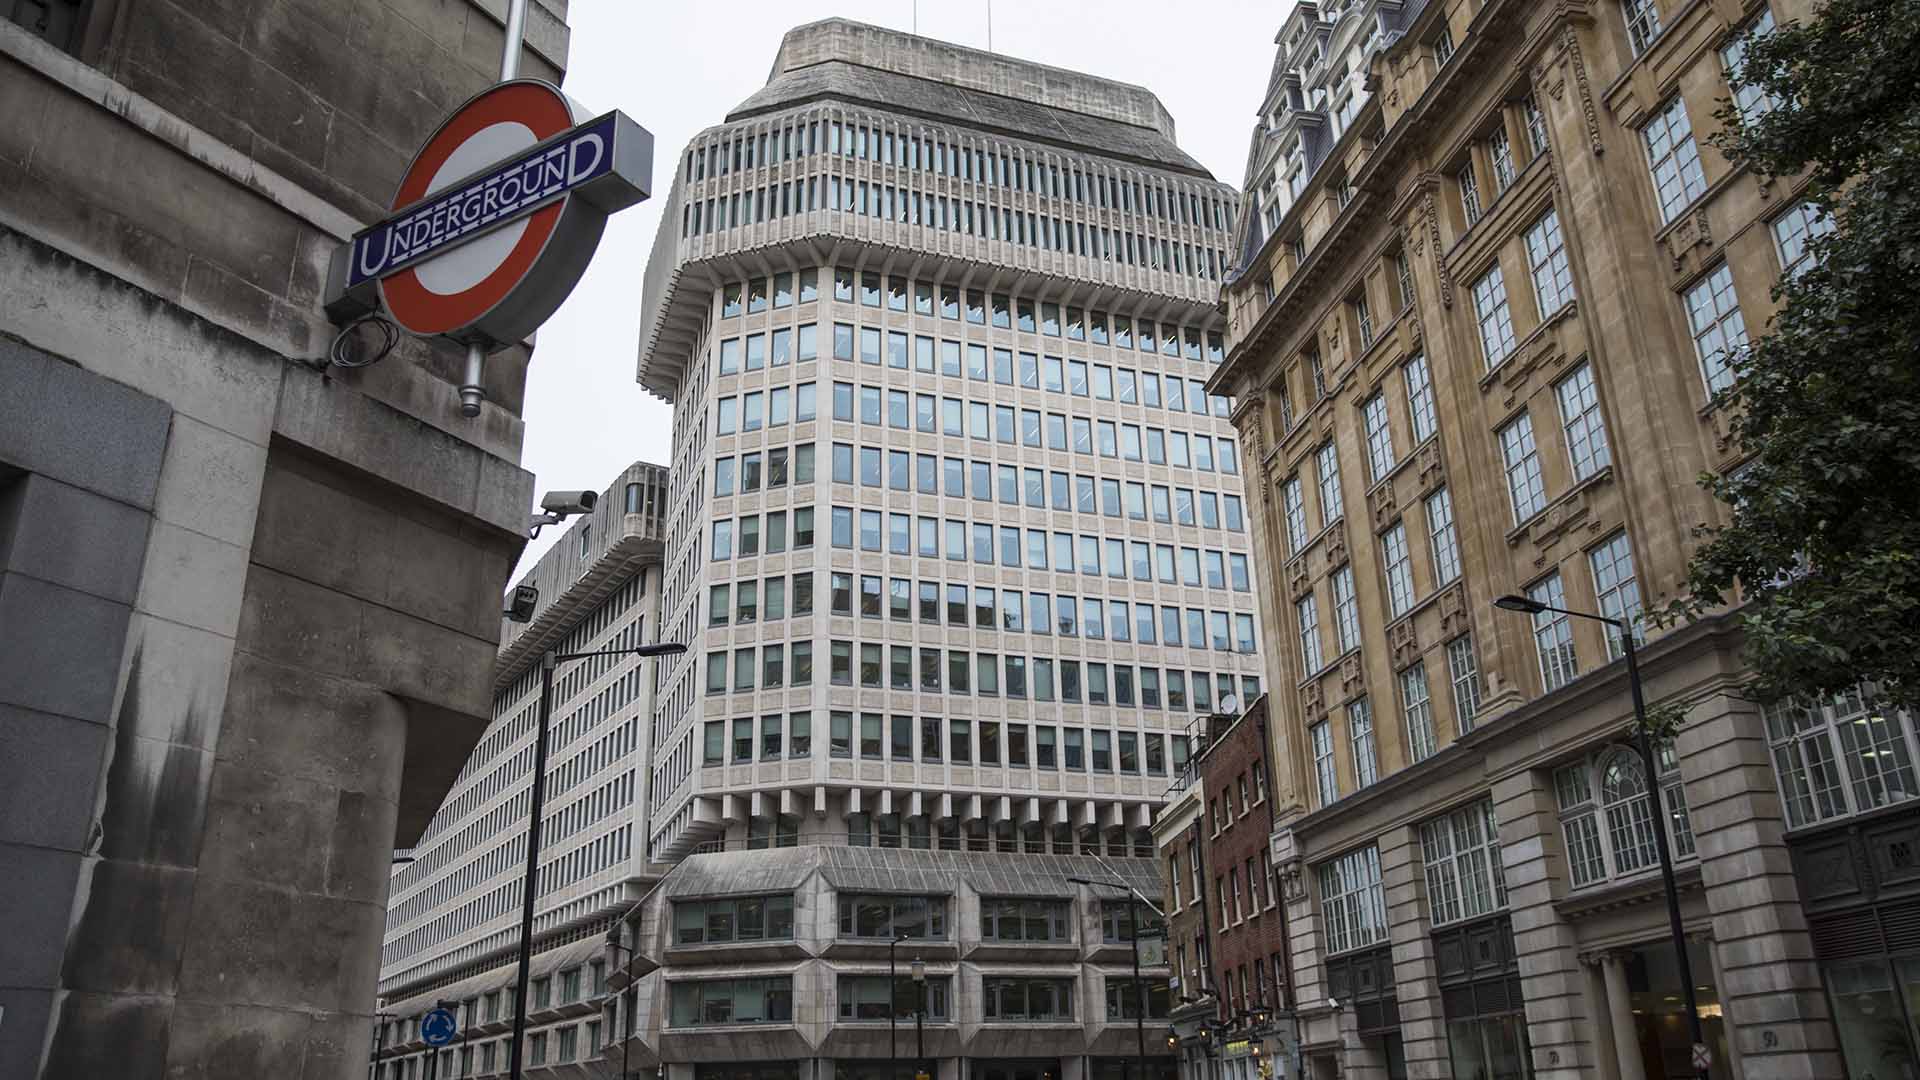 The U.K. Ministry of Justice in London next to the underground station